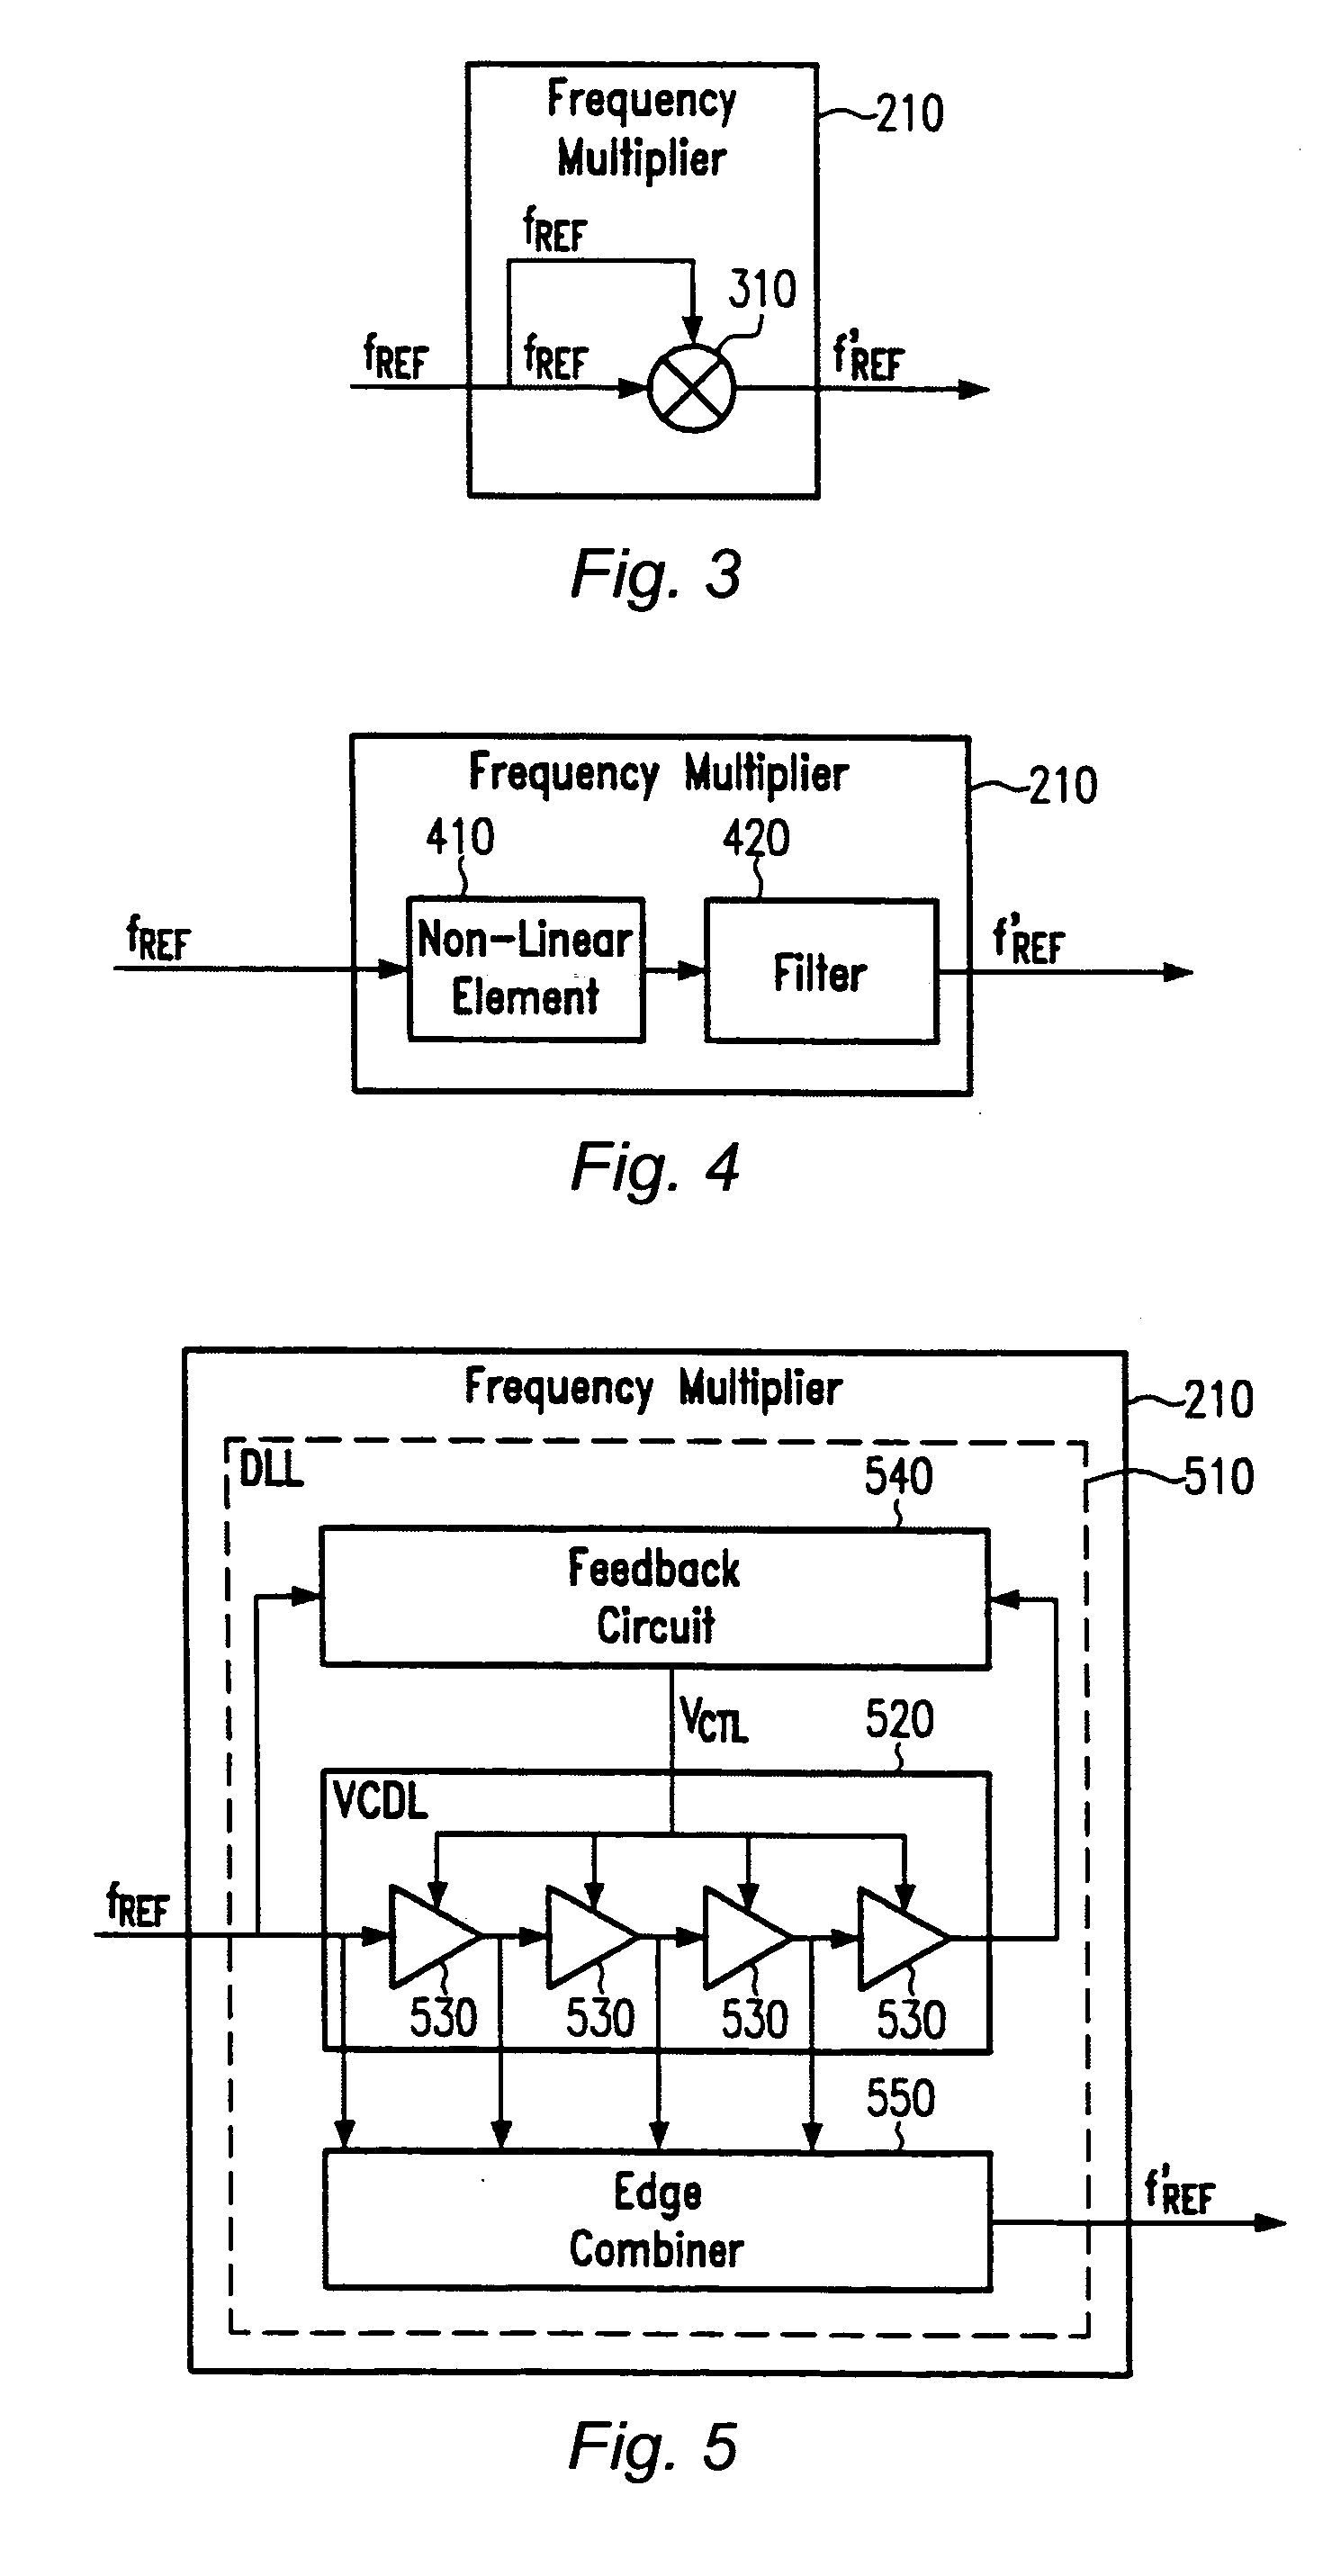 Frequency multiplier pre-stage for fractional-N phase-locked loops